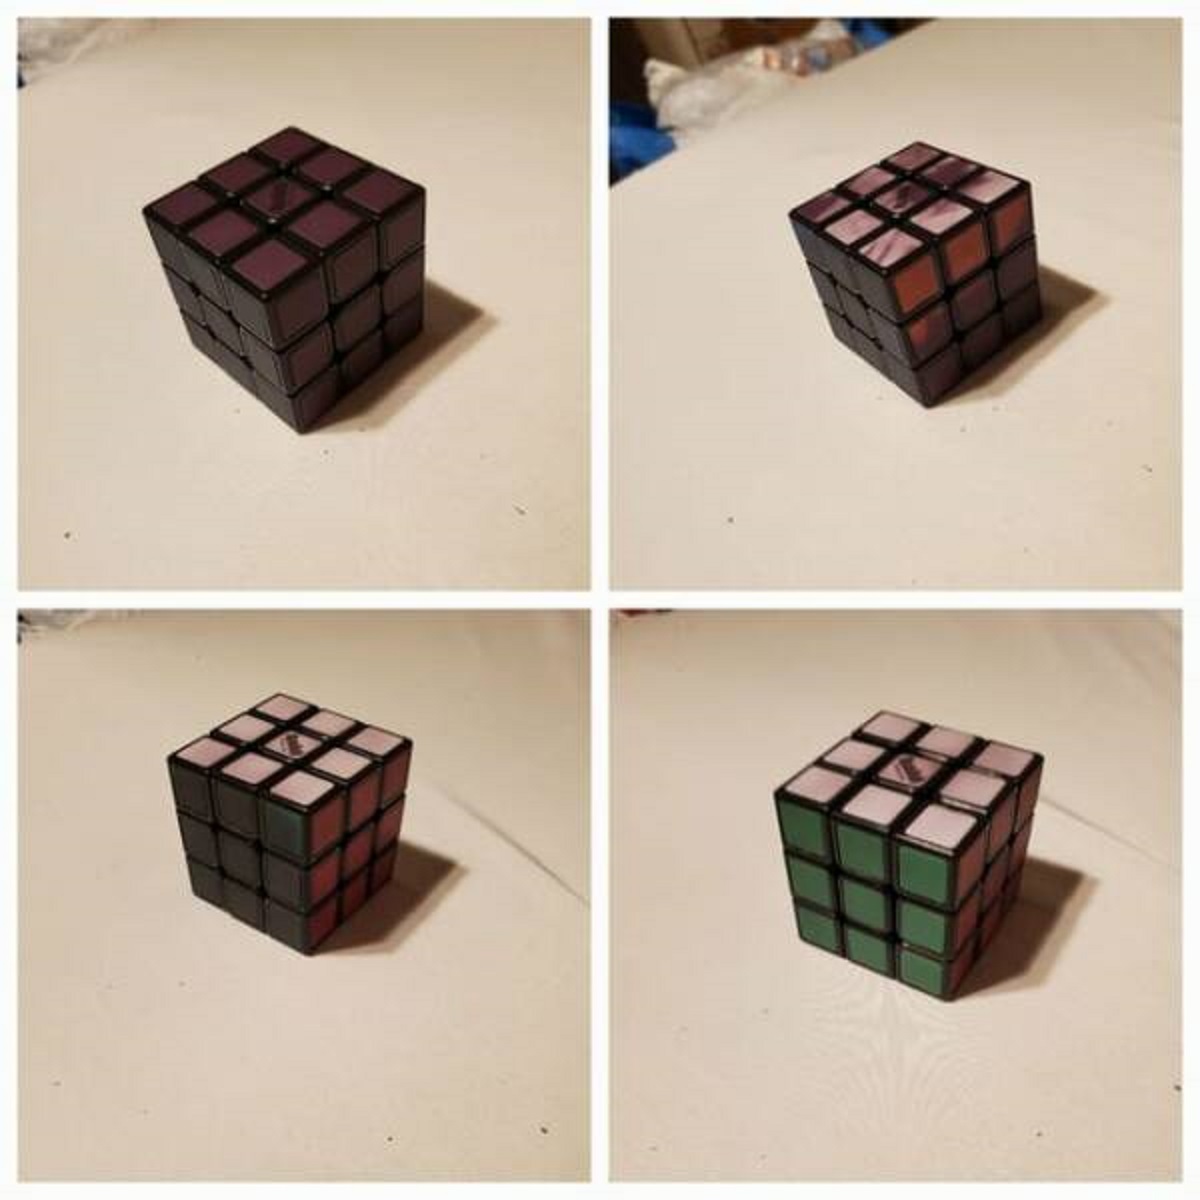 "This Rubik's Cube is designed to obscure the colors on each face until it is held."